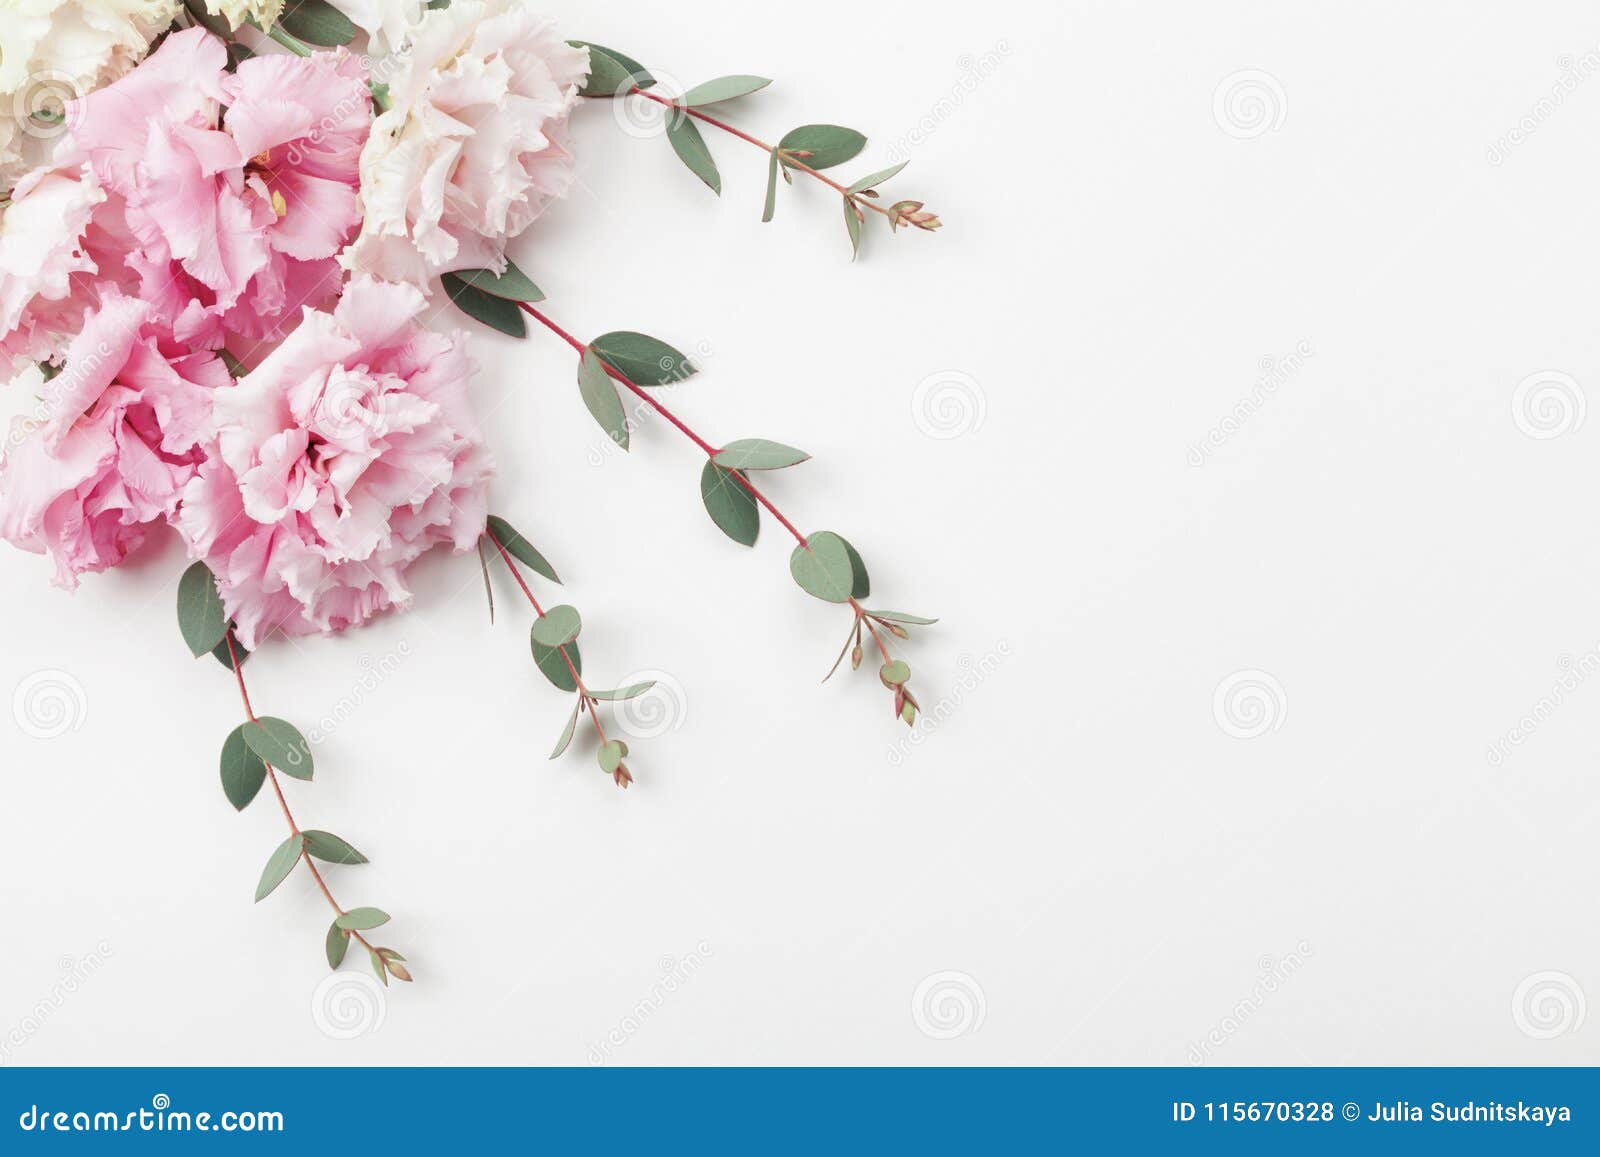 bunch of beautiful flowers and eucalyptus leaves on white table top view. flat lay style.